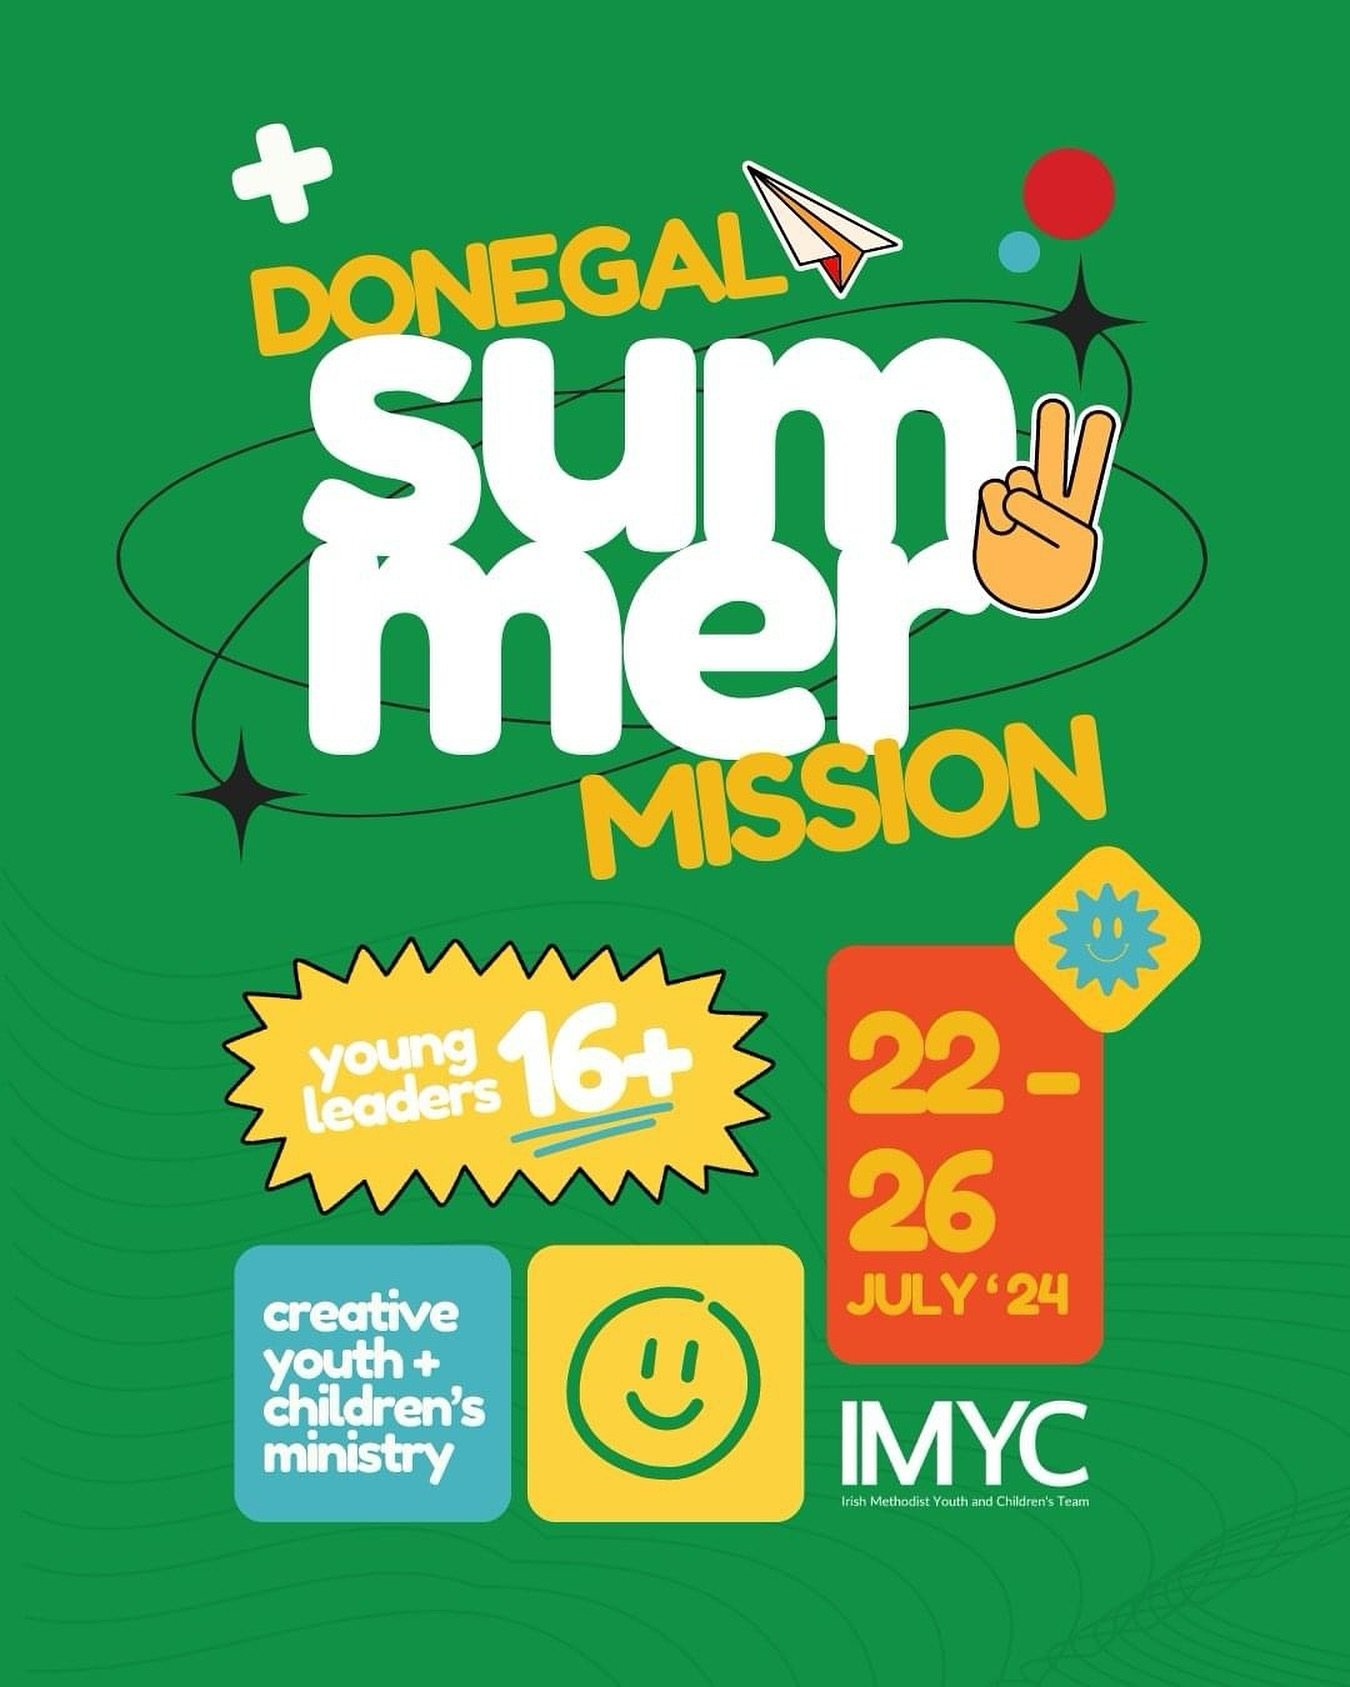 ☀️Are you a creative young leader looking for some last-minute summer plans? 👀 Look no further - this might be the opportunity for you! 🤝

IMYC are partnering with the Donegal, Ballintra and Inver Methodist Circuit, to coordinate a Creative Summer 